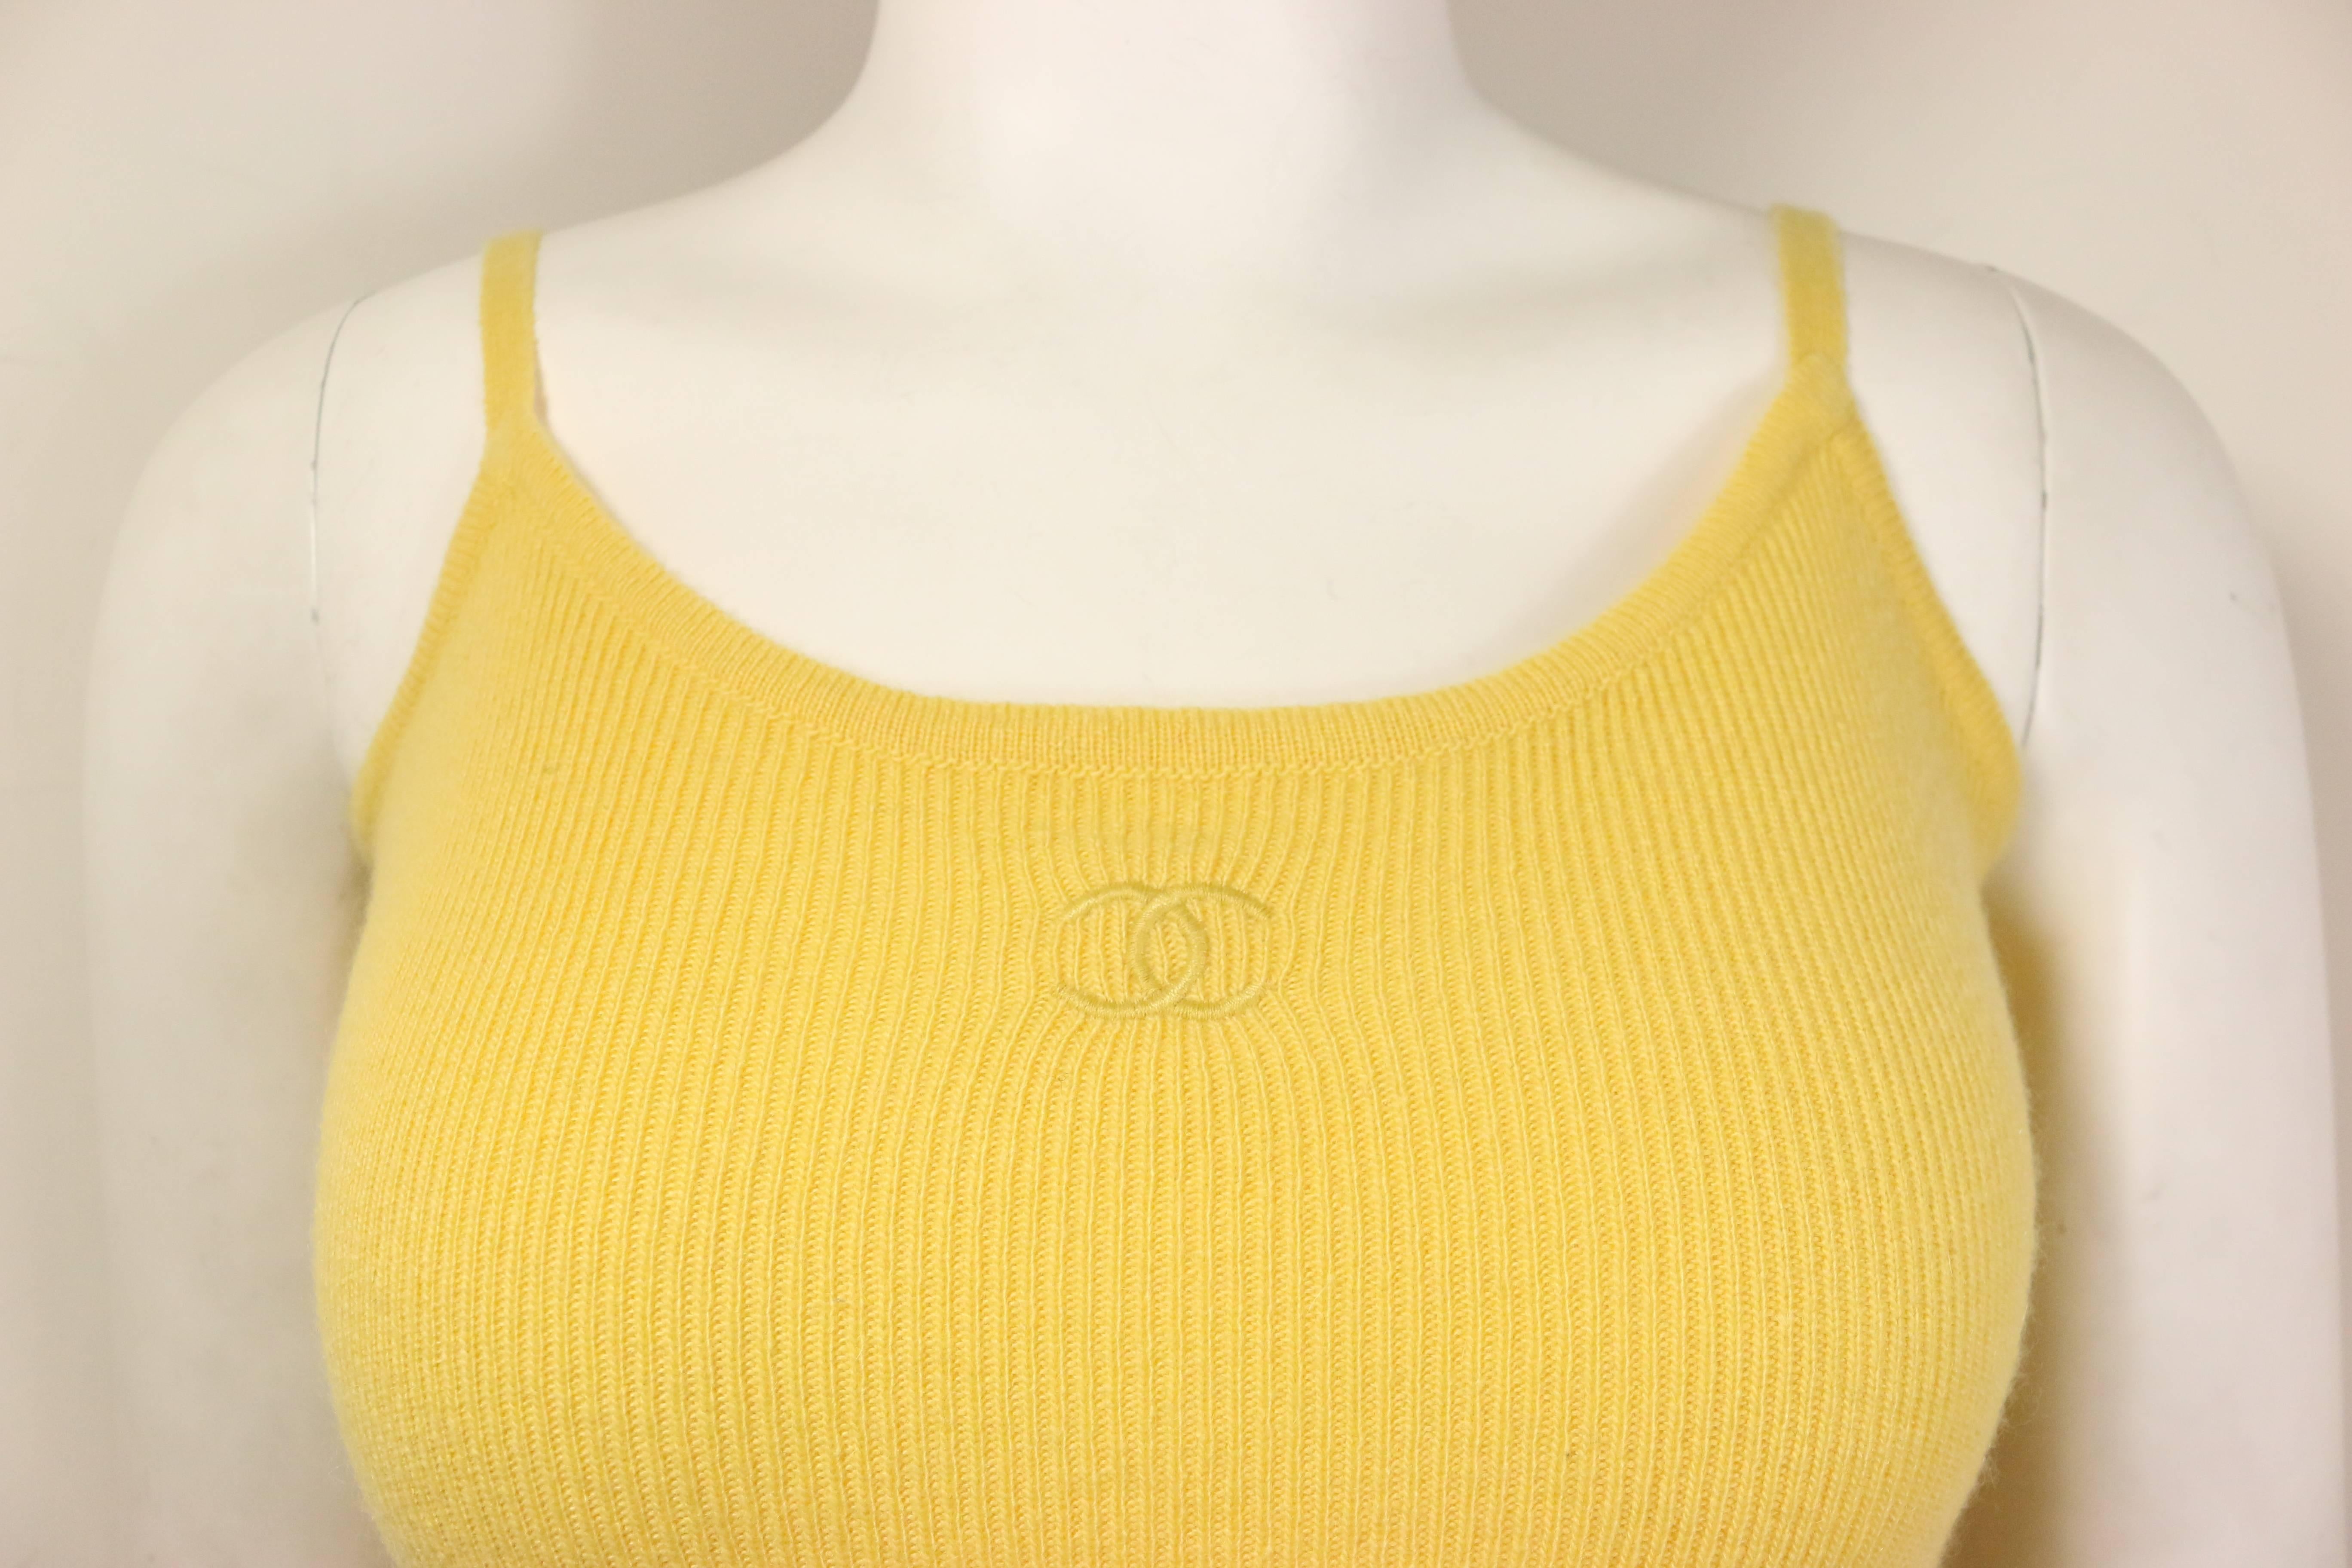 - Vintage Chanel yellow cashmere bodysuit from 1994 A/W collection. Featuring a "CC" logo. 

- Made in France. 

- Size 40. 

- 100% Cashmere. 